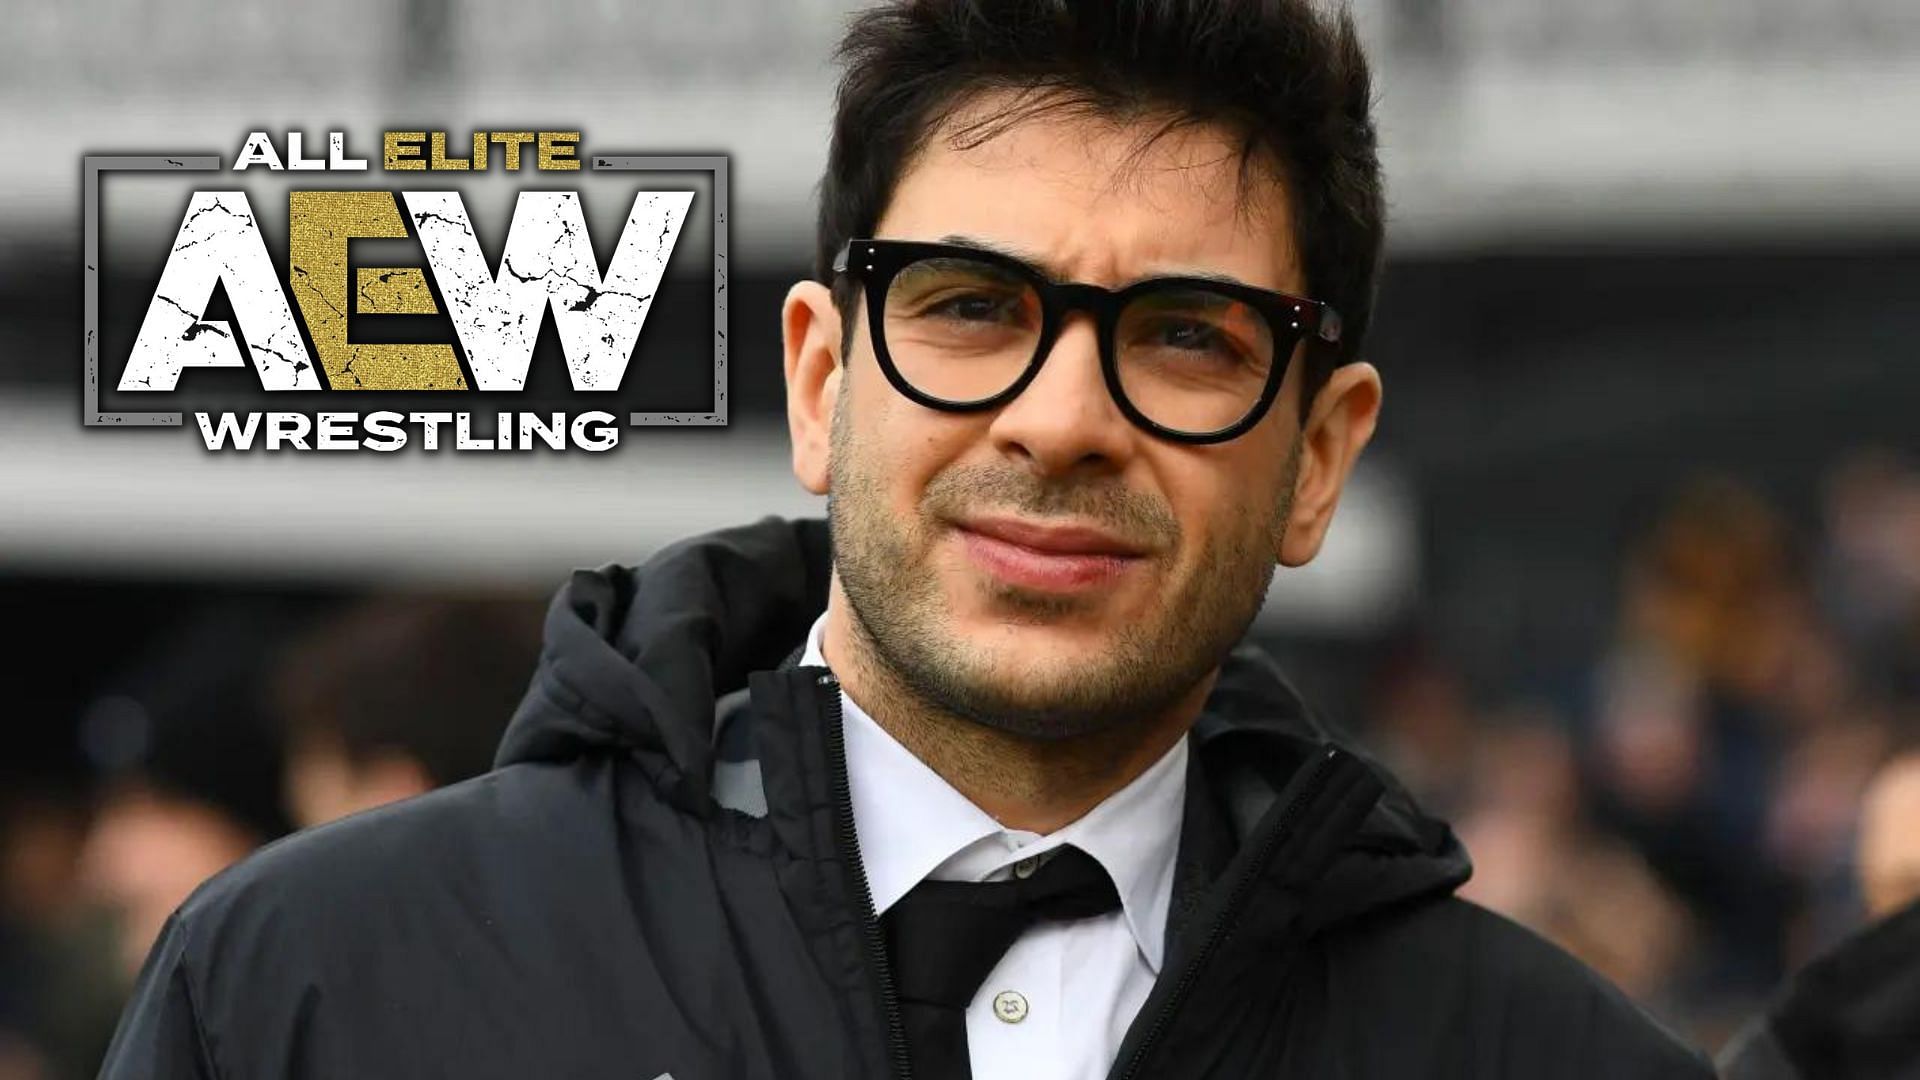 Tony Khan recently received some advice from an AEW star